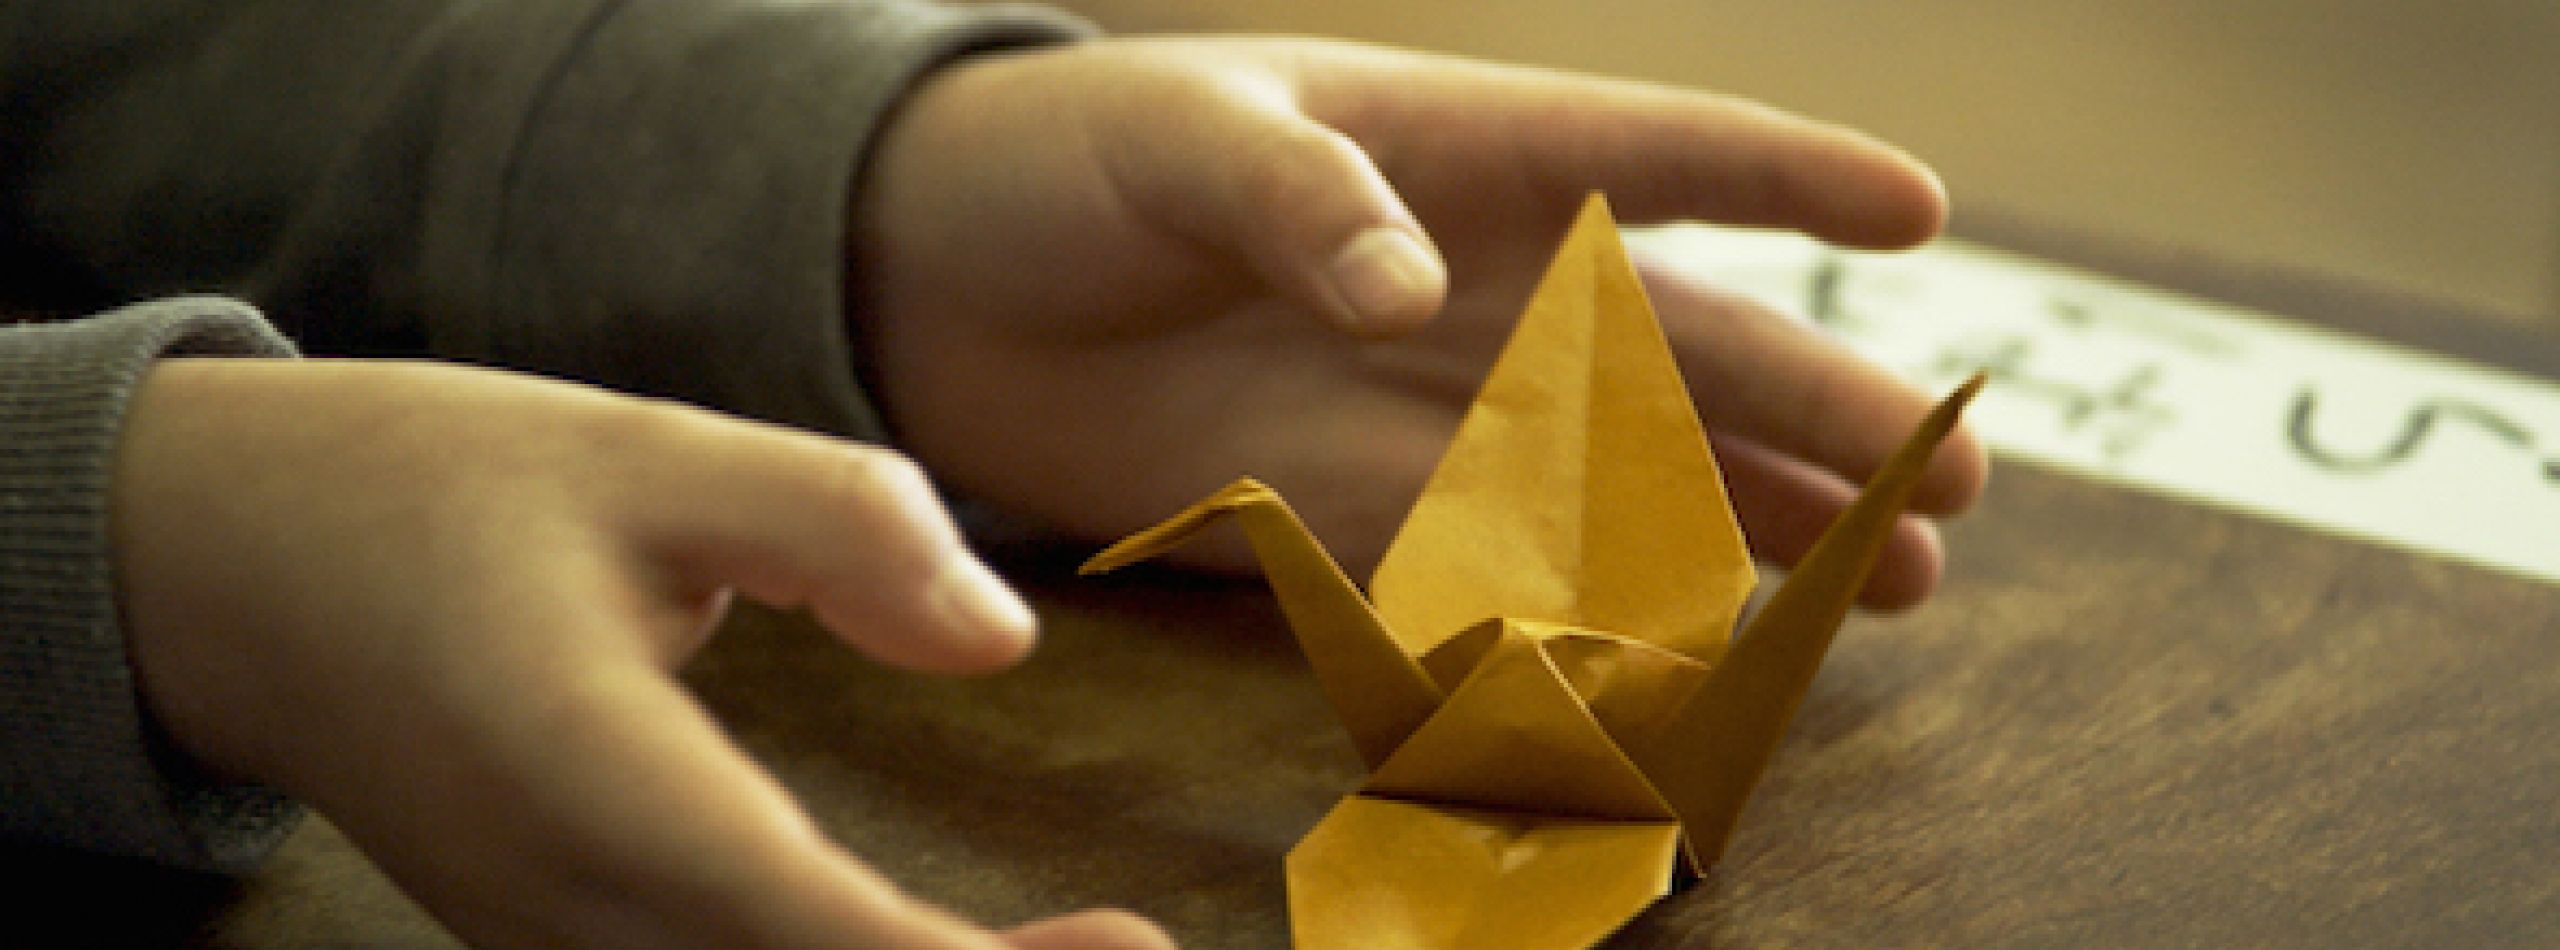 The Origami Code – Scientists uncover the power of folding